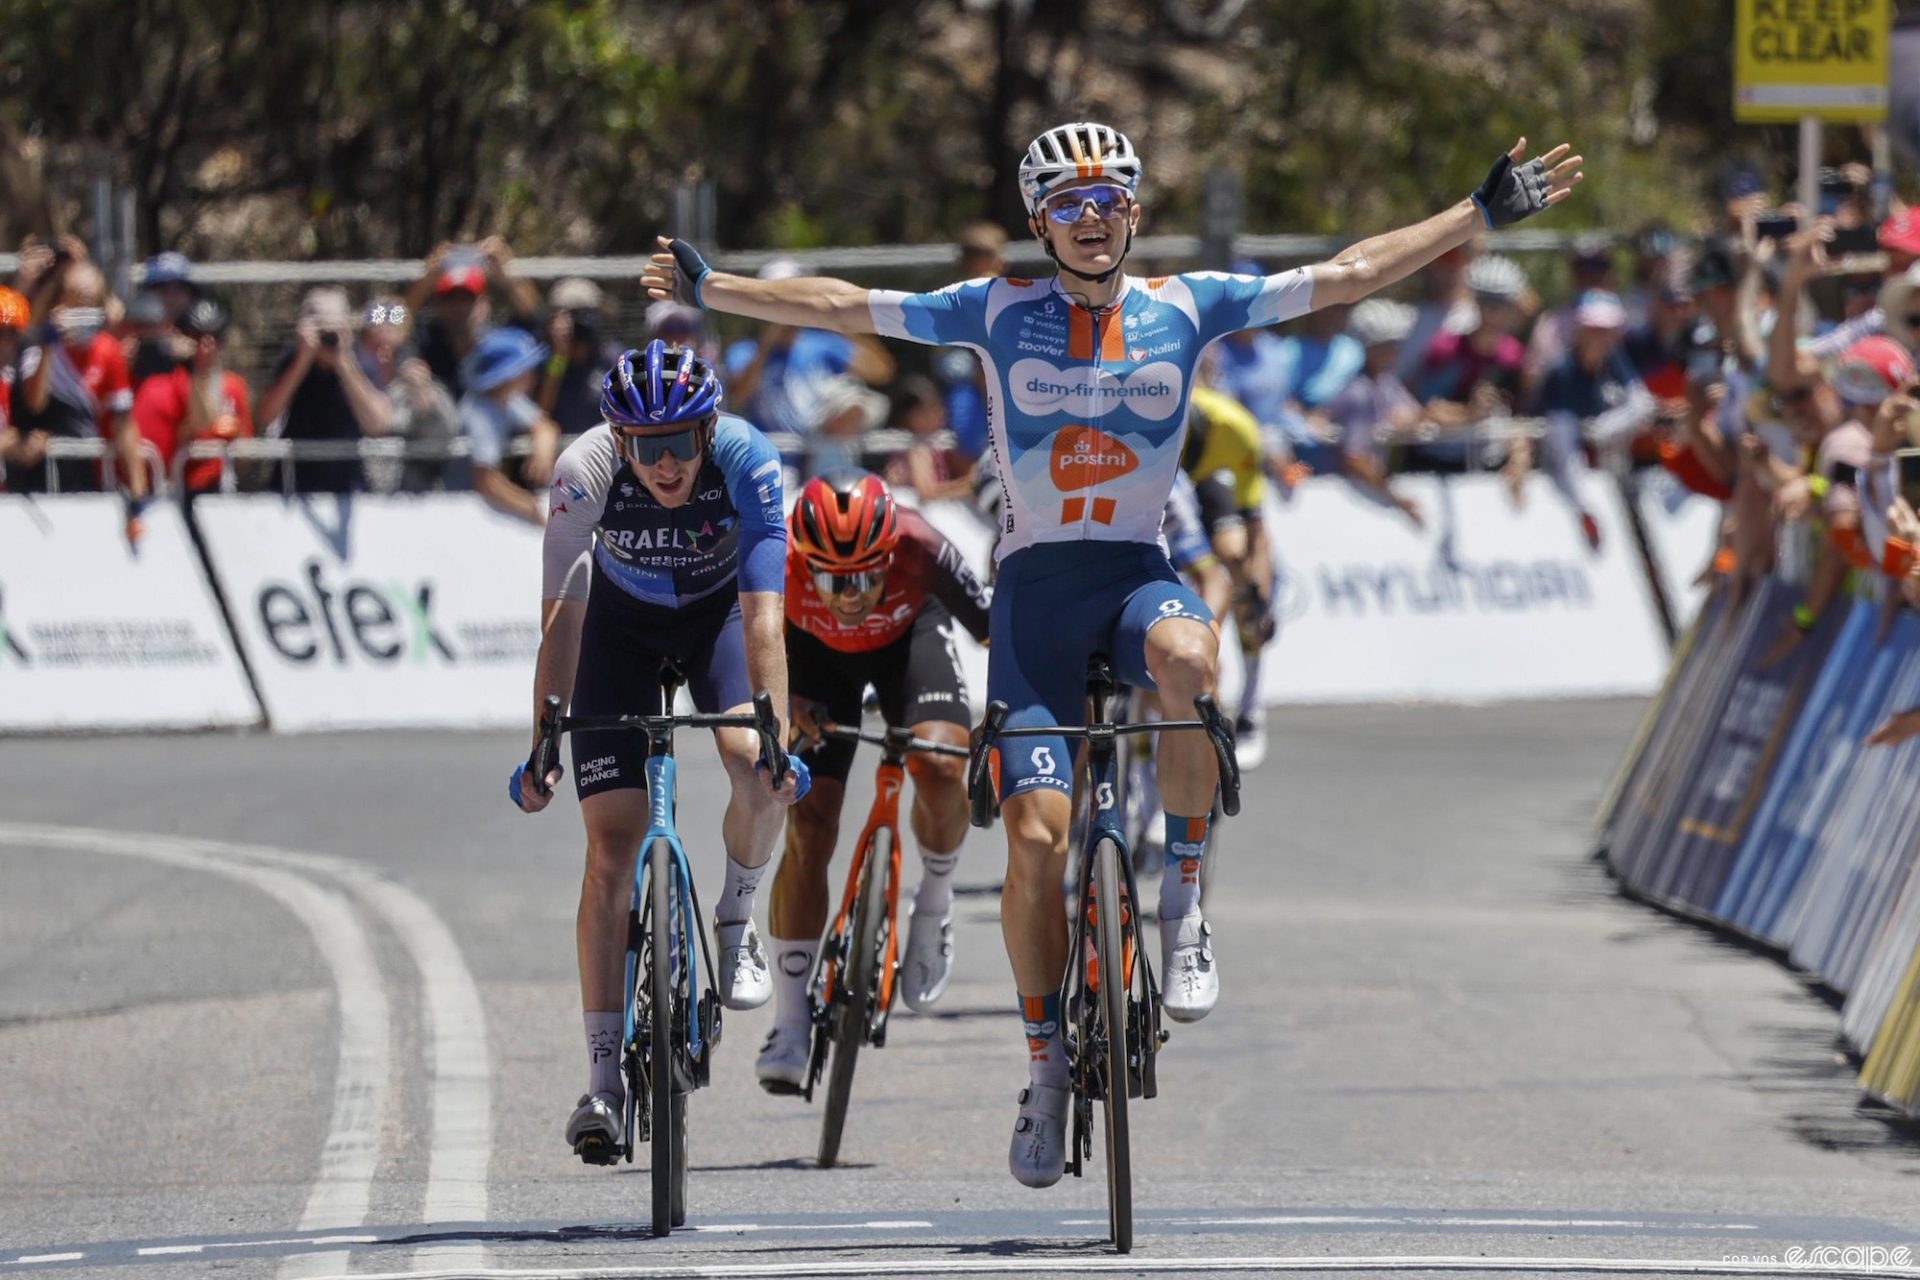 Oscar Onley wins stage 5 of the Tour Down Under.